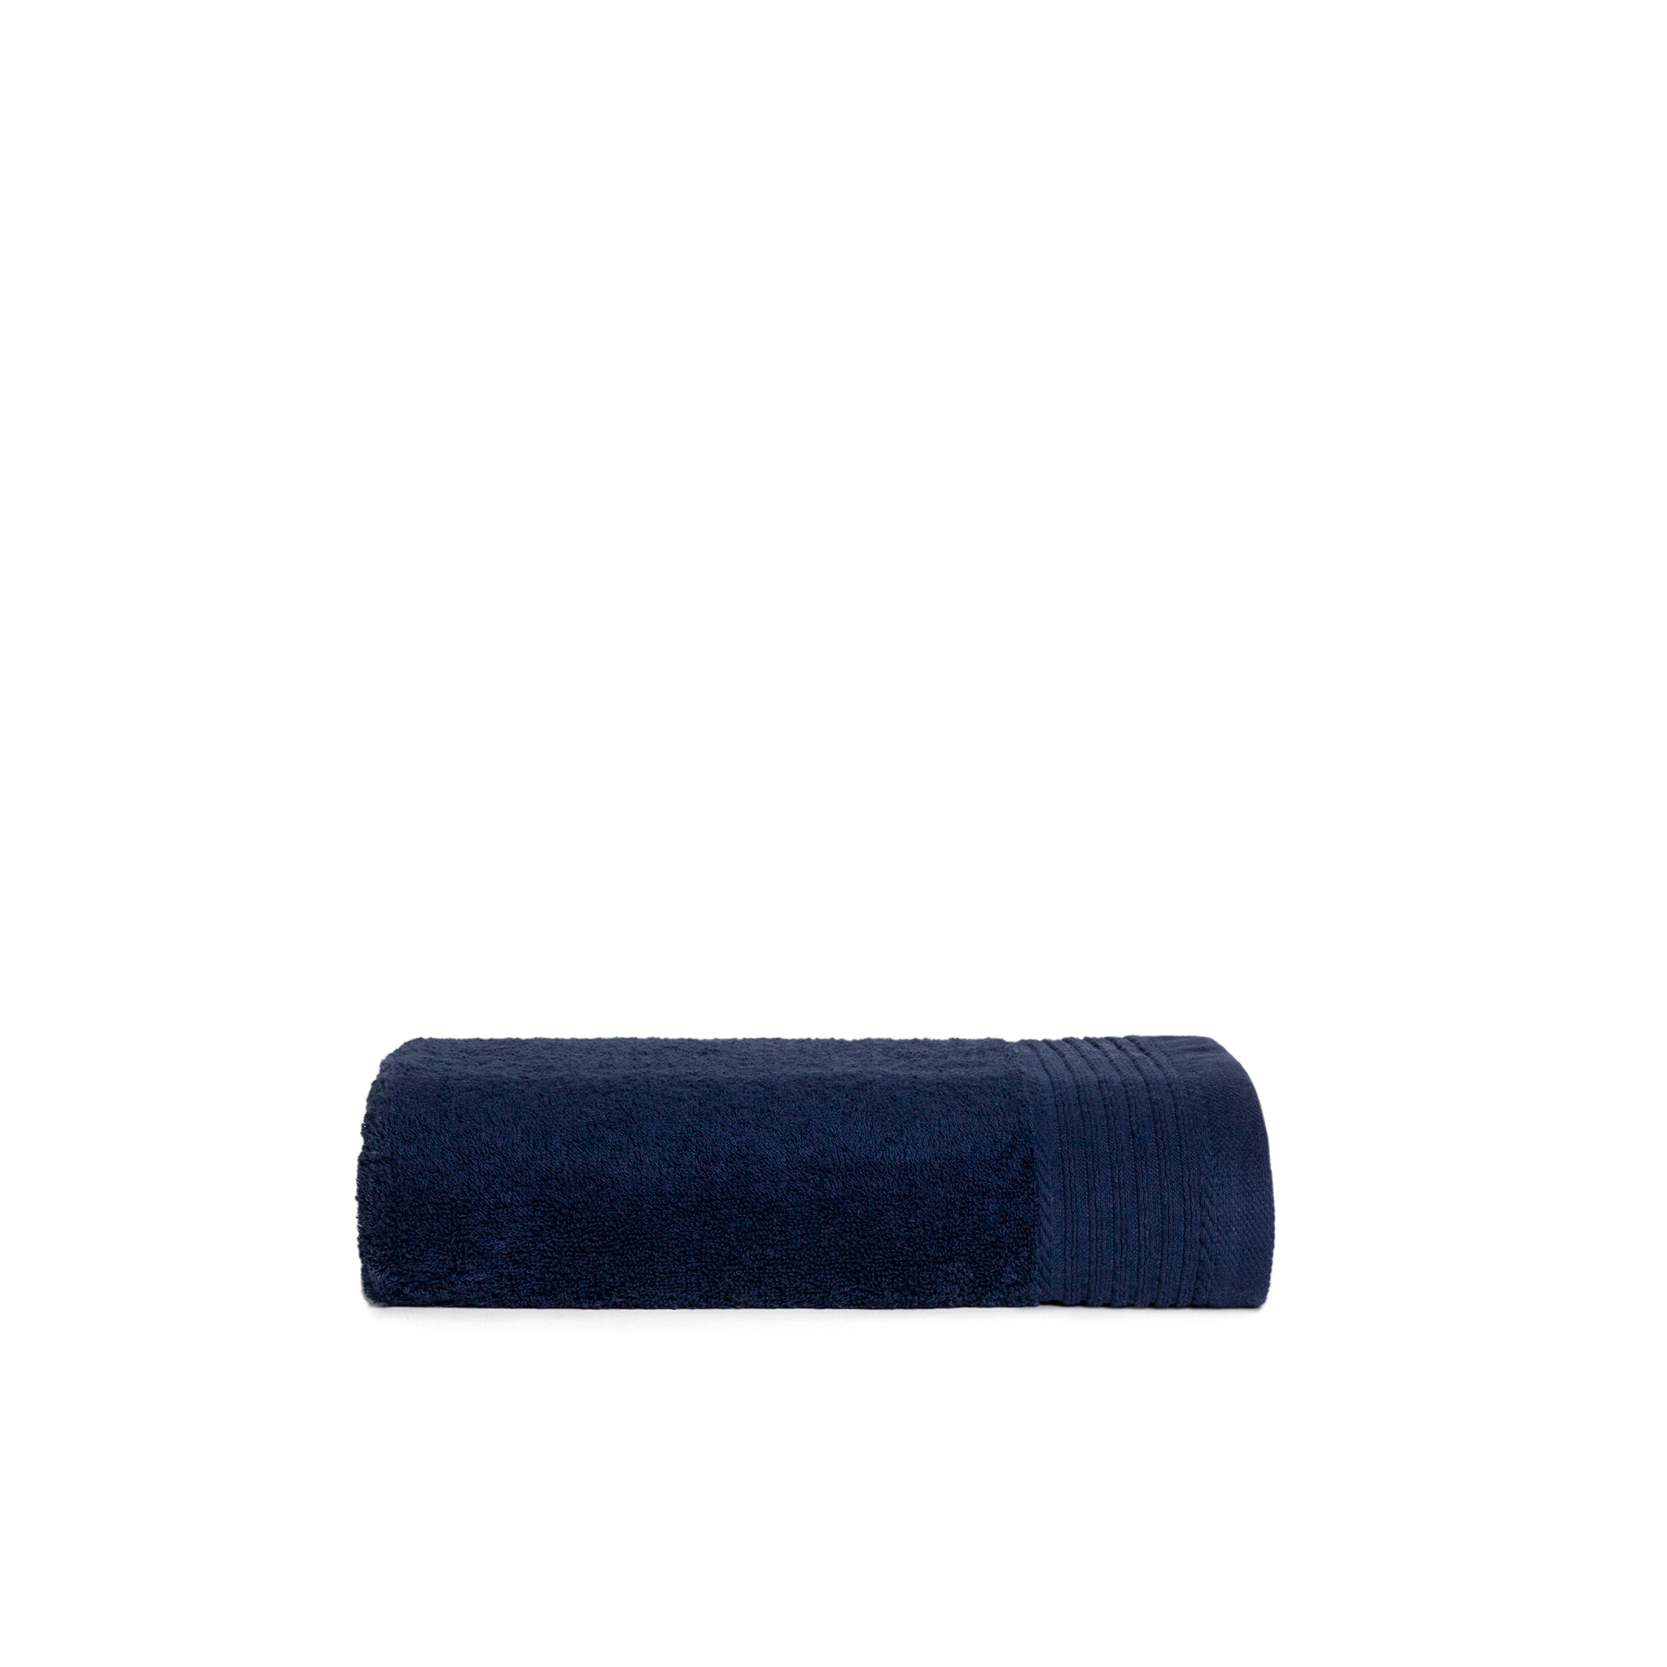 T1-DELUXE60NAVYBLUE-1